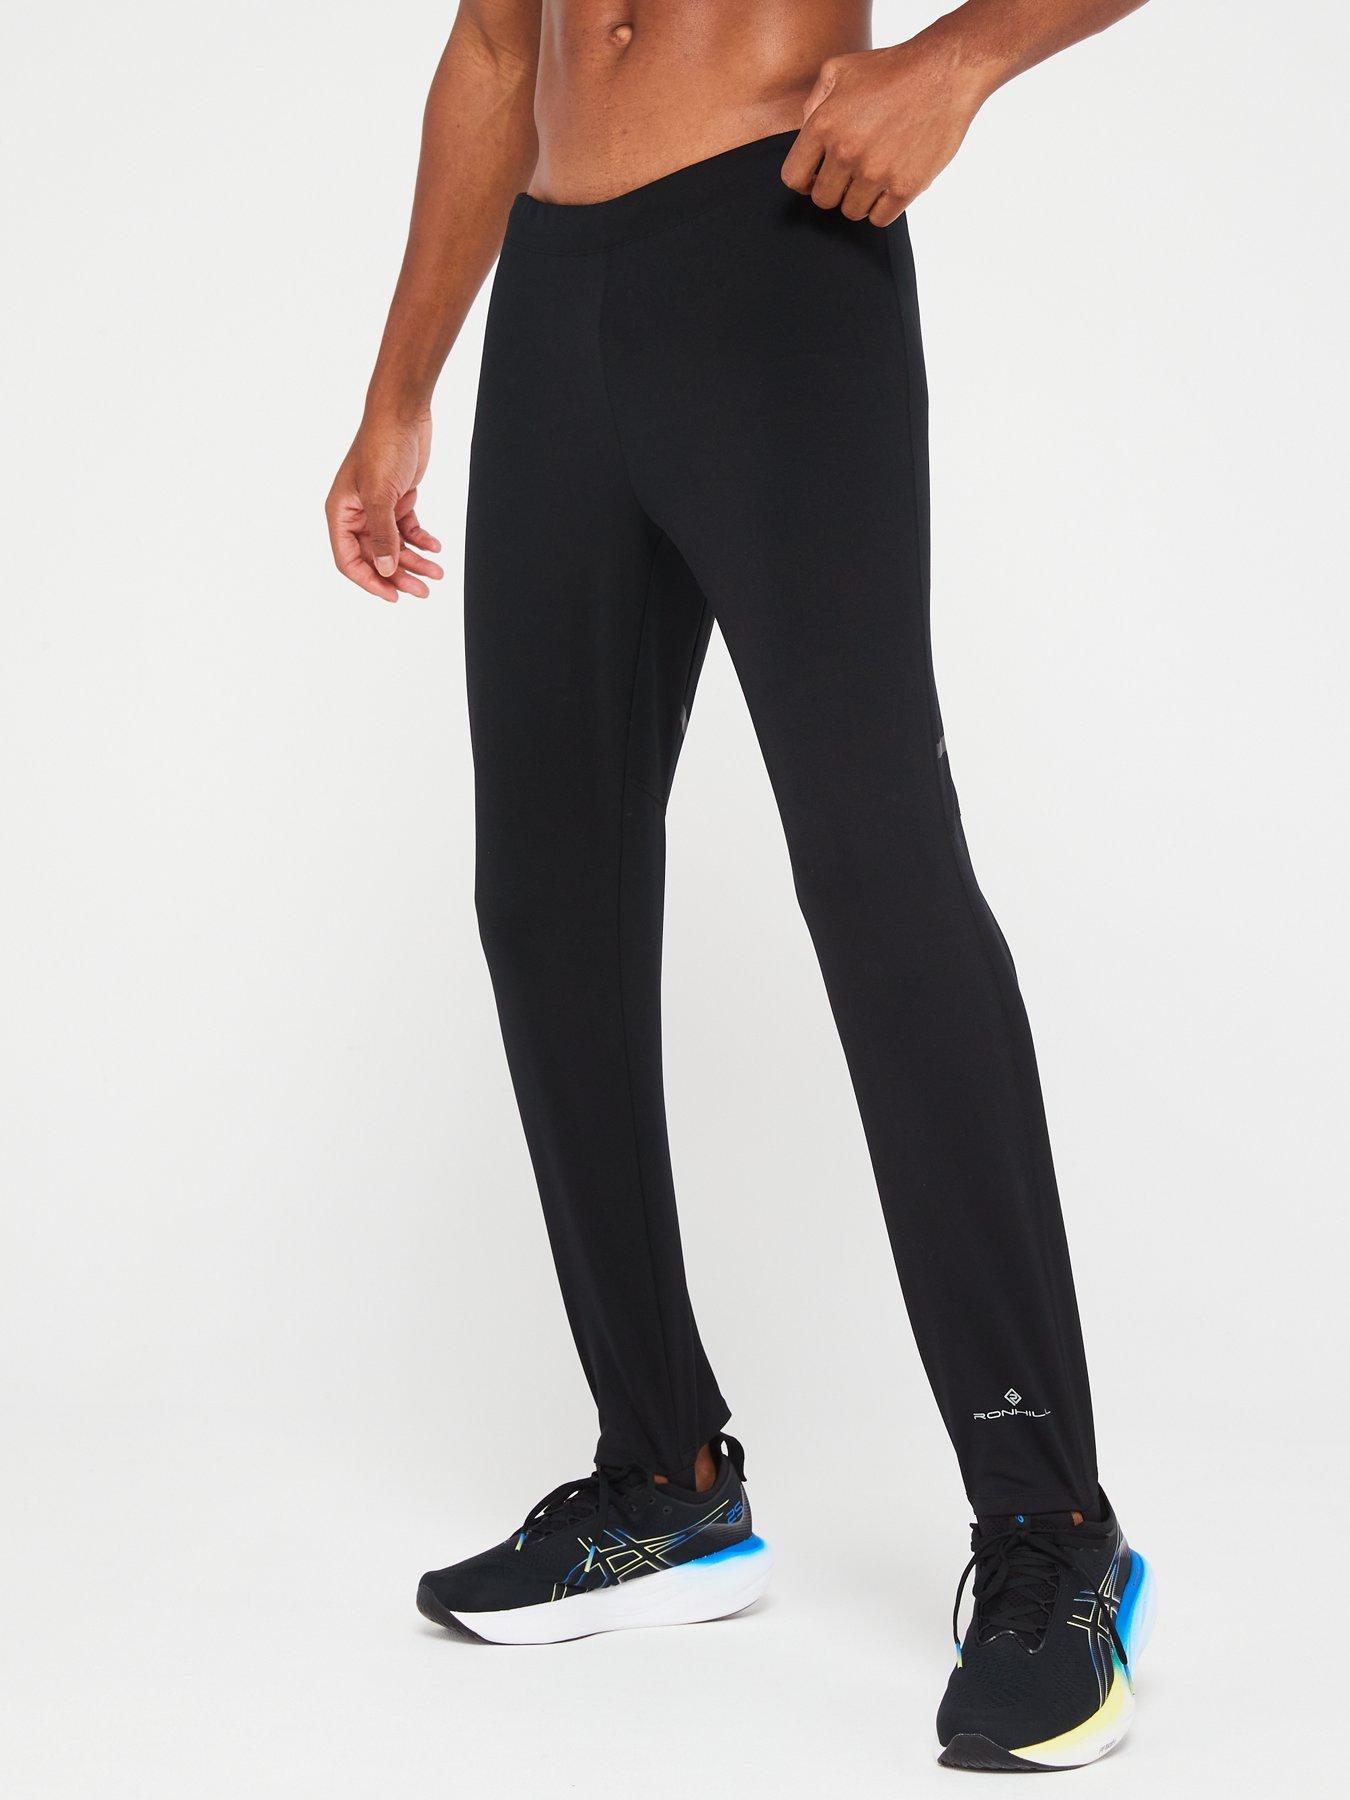 SALE] Under Armour compression yoga exercise leggings for women - ander armour  ladies Yoga Pants , Underarmour jogging pants - Size XS to Small, Women's  Fashion, Activewear on Carousell